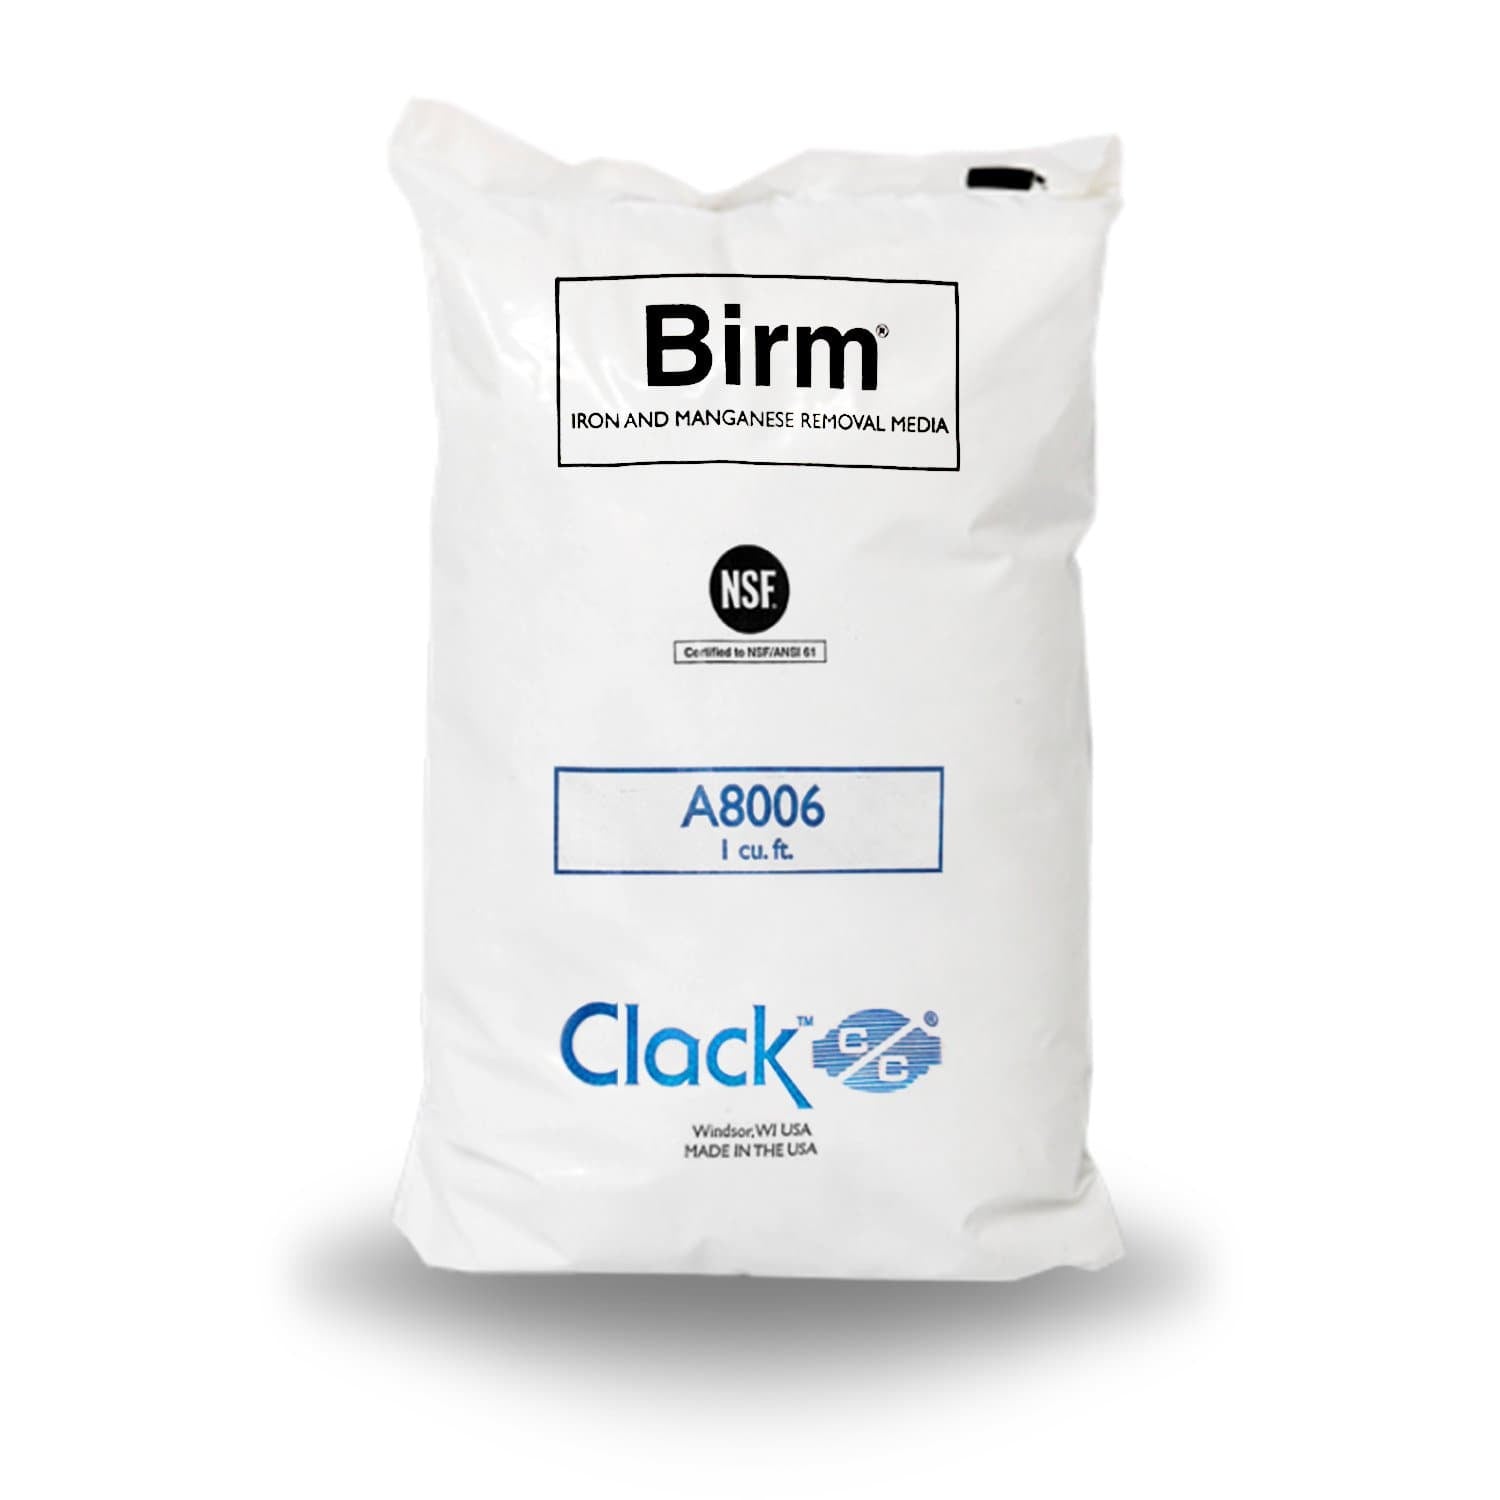 Birm Filter Media (Removes Iron and Manganese from Well Water)